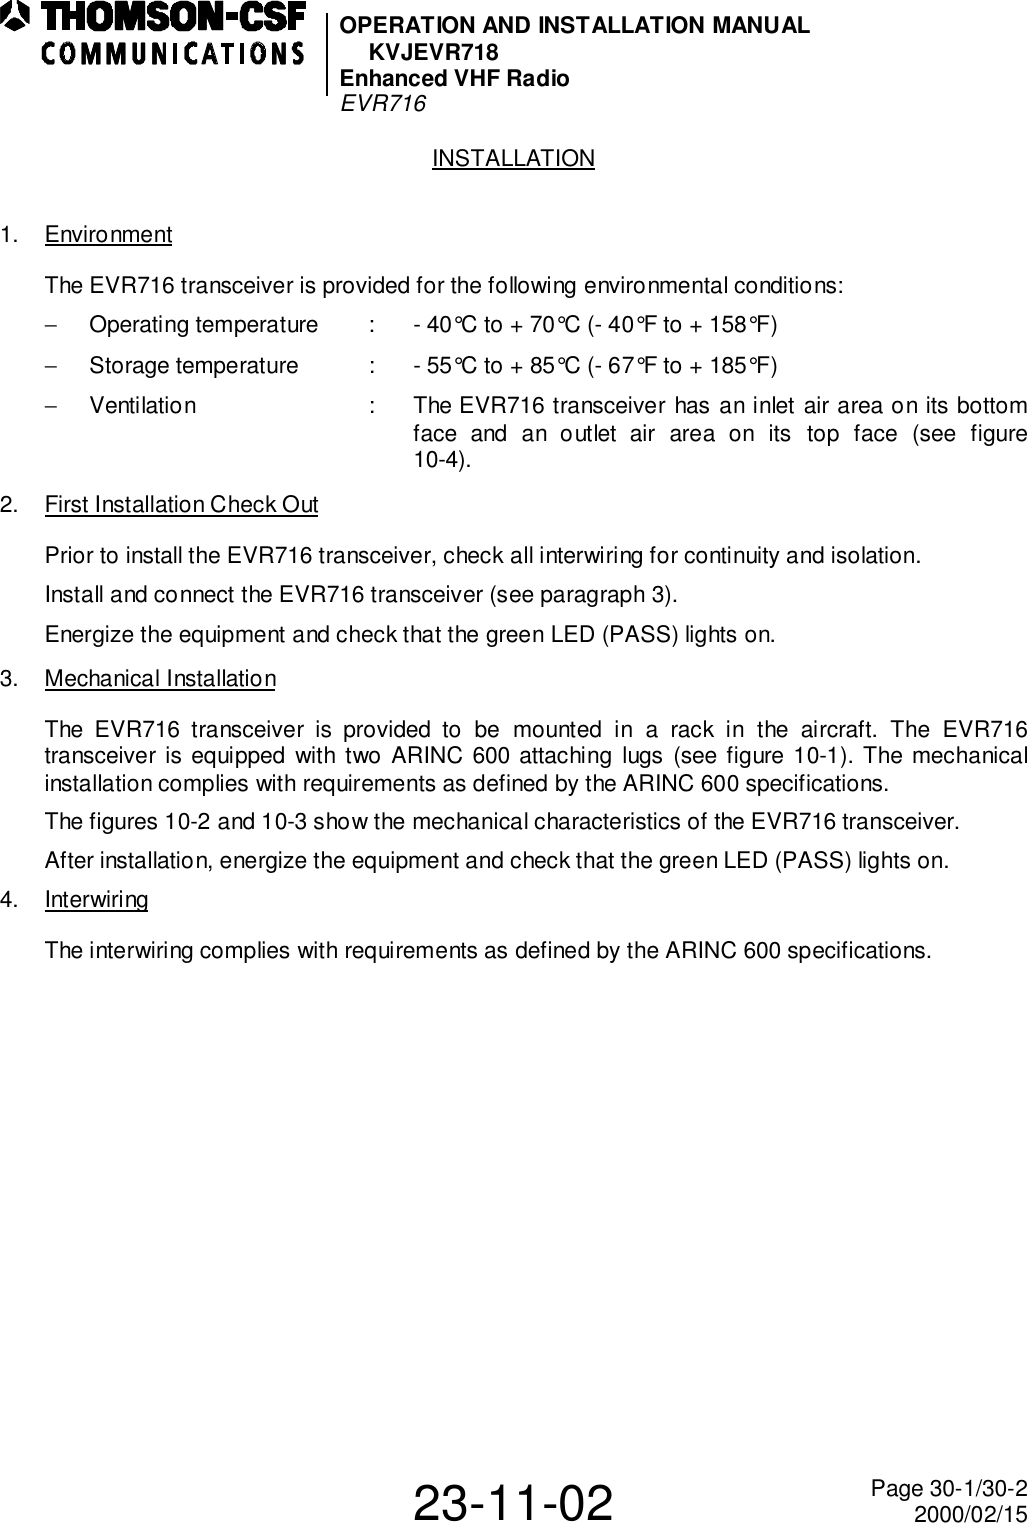 OPERATION AND INSTALLATION MANUALKVJEVR718Enhanced VHF RadioEVR71623-11-02 Page 30-1/30-22000/02/15INSTALLATION1. EnvironmentThe EVR716 transceiver is provided for the following environmental conditions:−  Operating temperature : - 40°C to + 70°C (- 40°F to + 158°F)−  Storage temperature : - 55°C to + 85°C (- 67°F to + 185°F)−  Ventilation : The EVR716 transceiver has an inlet air area on its bottomface and an outlet air area on its top face (see figure10-4).2. First Installation Check OutPrior to install the EVR716 transceiver, check all interwiring for continuity and isolation.Install and connect the EVR716 transceiver (see paragraph 3).Energize the equipment and check that the green LED (PASS) lights on.3. Mechanical InstallationThe EVR716 transceiver is provided to be mounted in a rack in the aircraft. The EVR716transceiver is equipped with two ARINC 600 attaching lugs (see figure 10-1). The mechanicalinstallation complies with requirements as defined by the ARINC 600 specifications.The figures 10-2 and 10-3 show the mechanical characteristics of the EVR716 transceiver.After installation, energize the equipment and check that the green LED (PASS) lights on.4. InterwiringThe interwiring complies with requirements as defined by the ARINC 600 specifications.